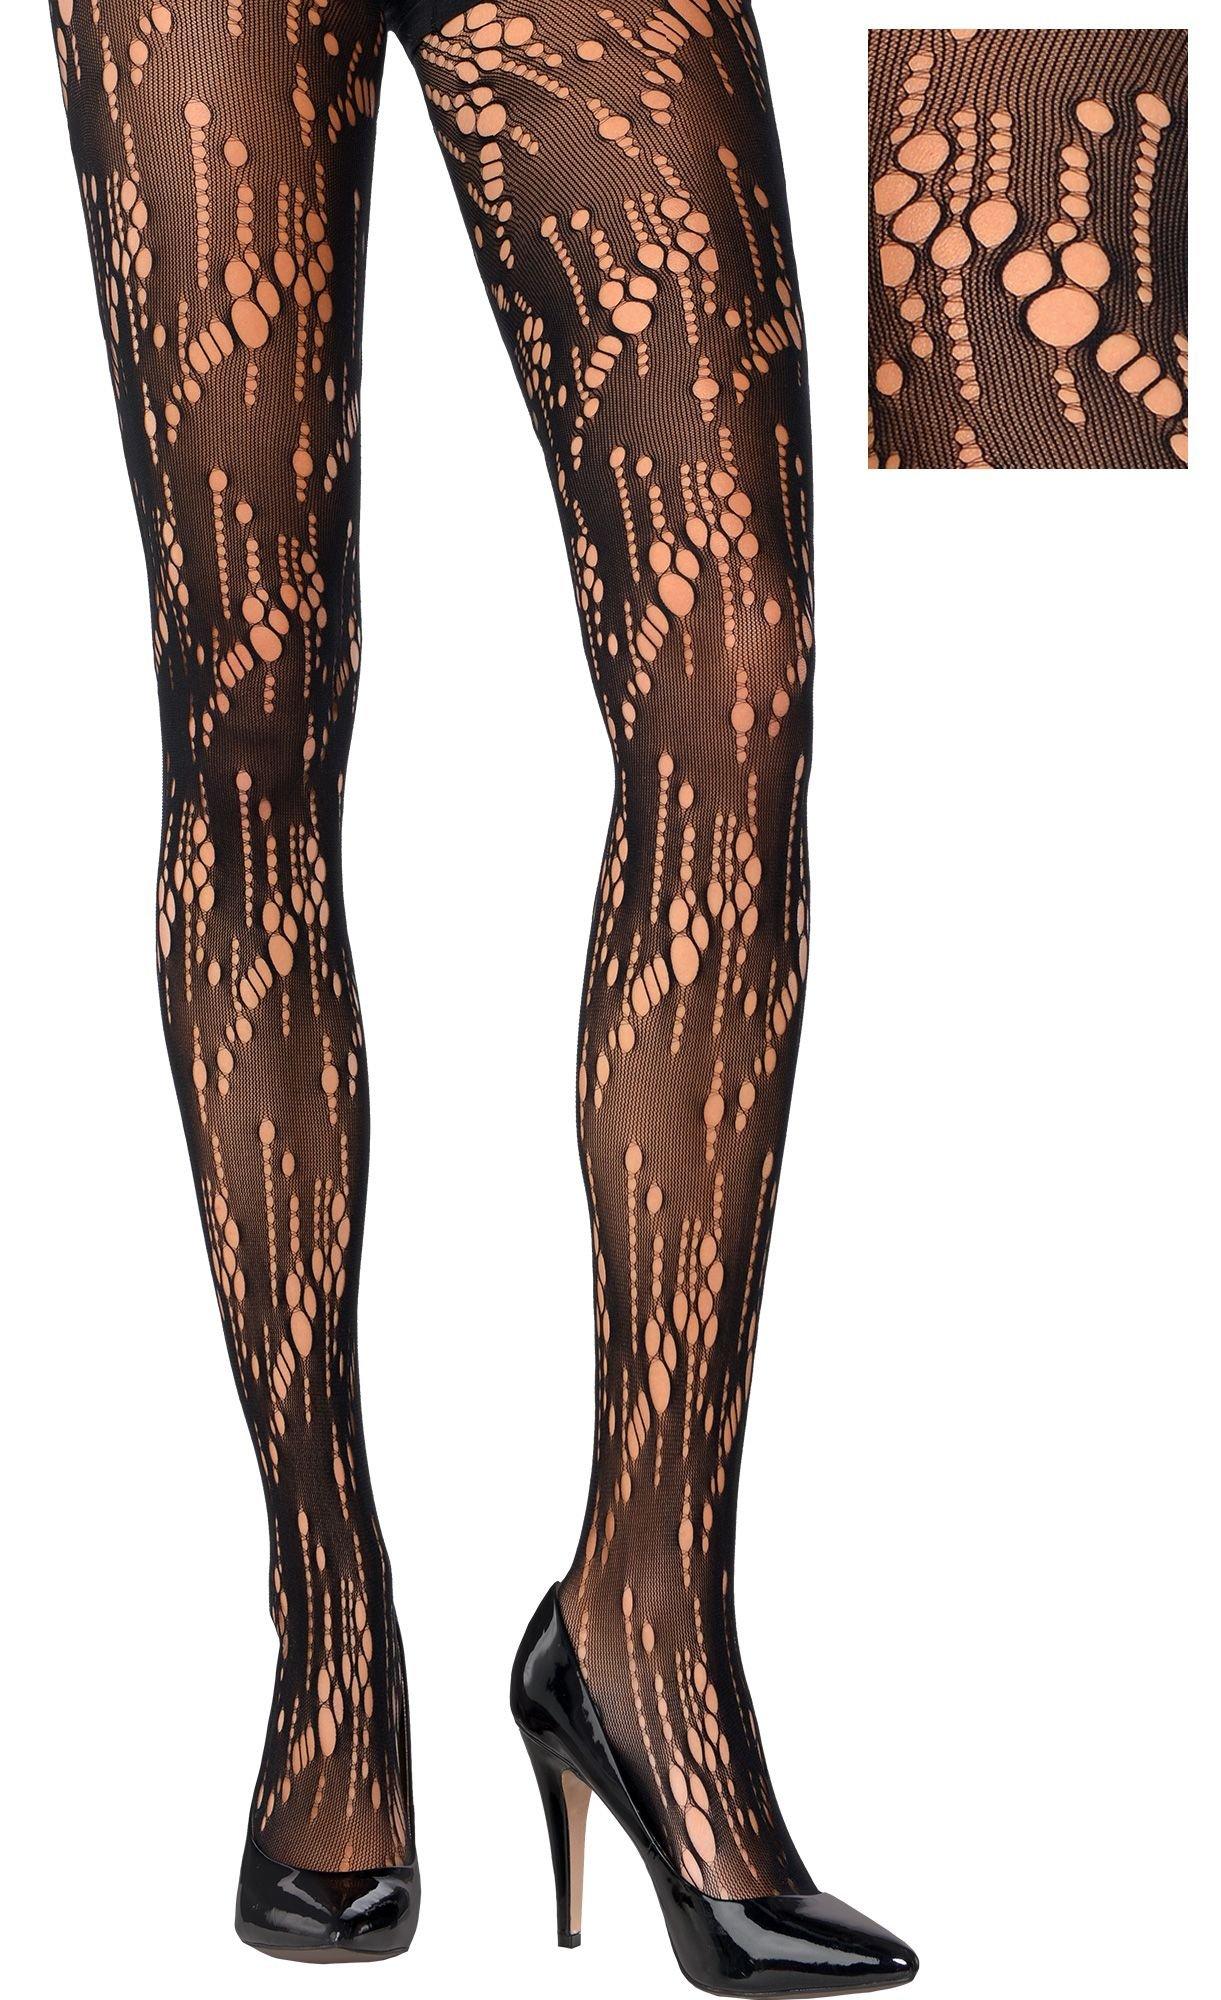 Sheer Ripped Tights  Ripped tights, Ripped pantyhose, Ripped stockings